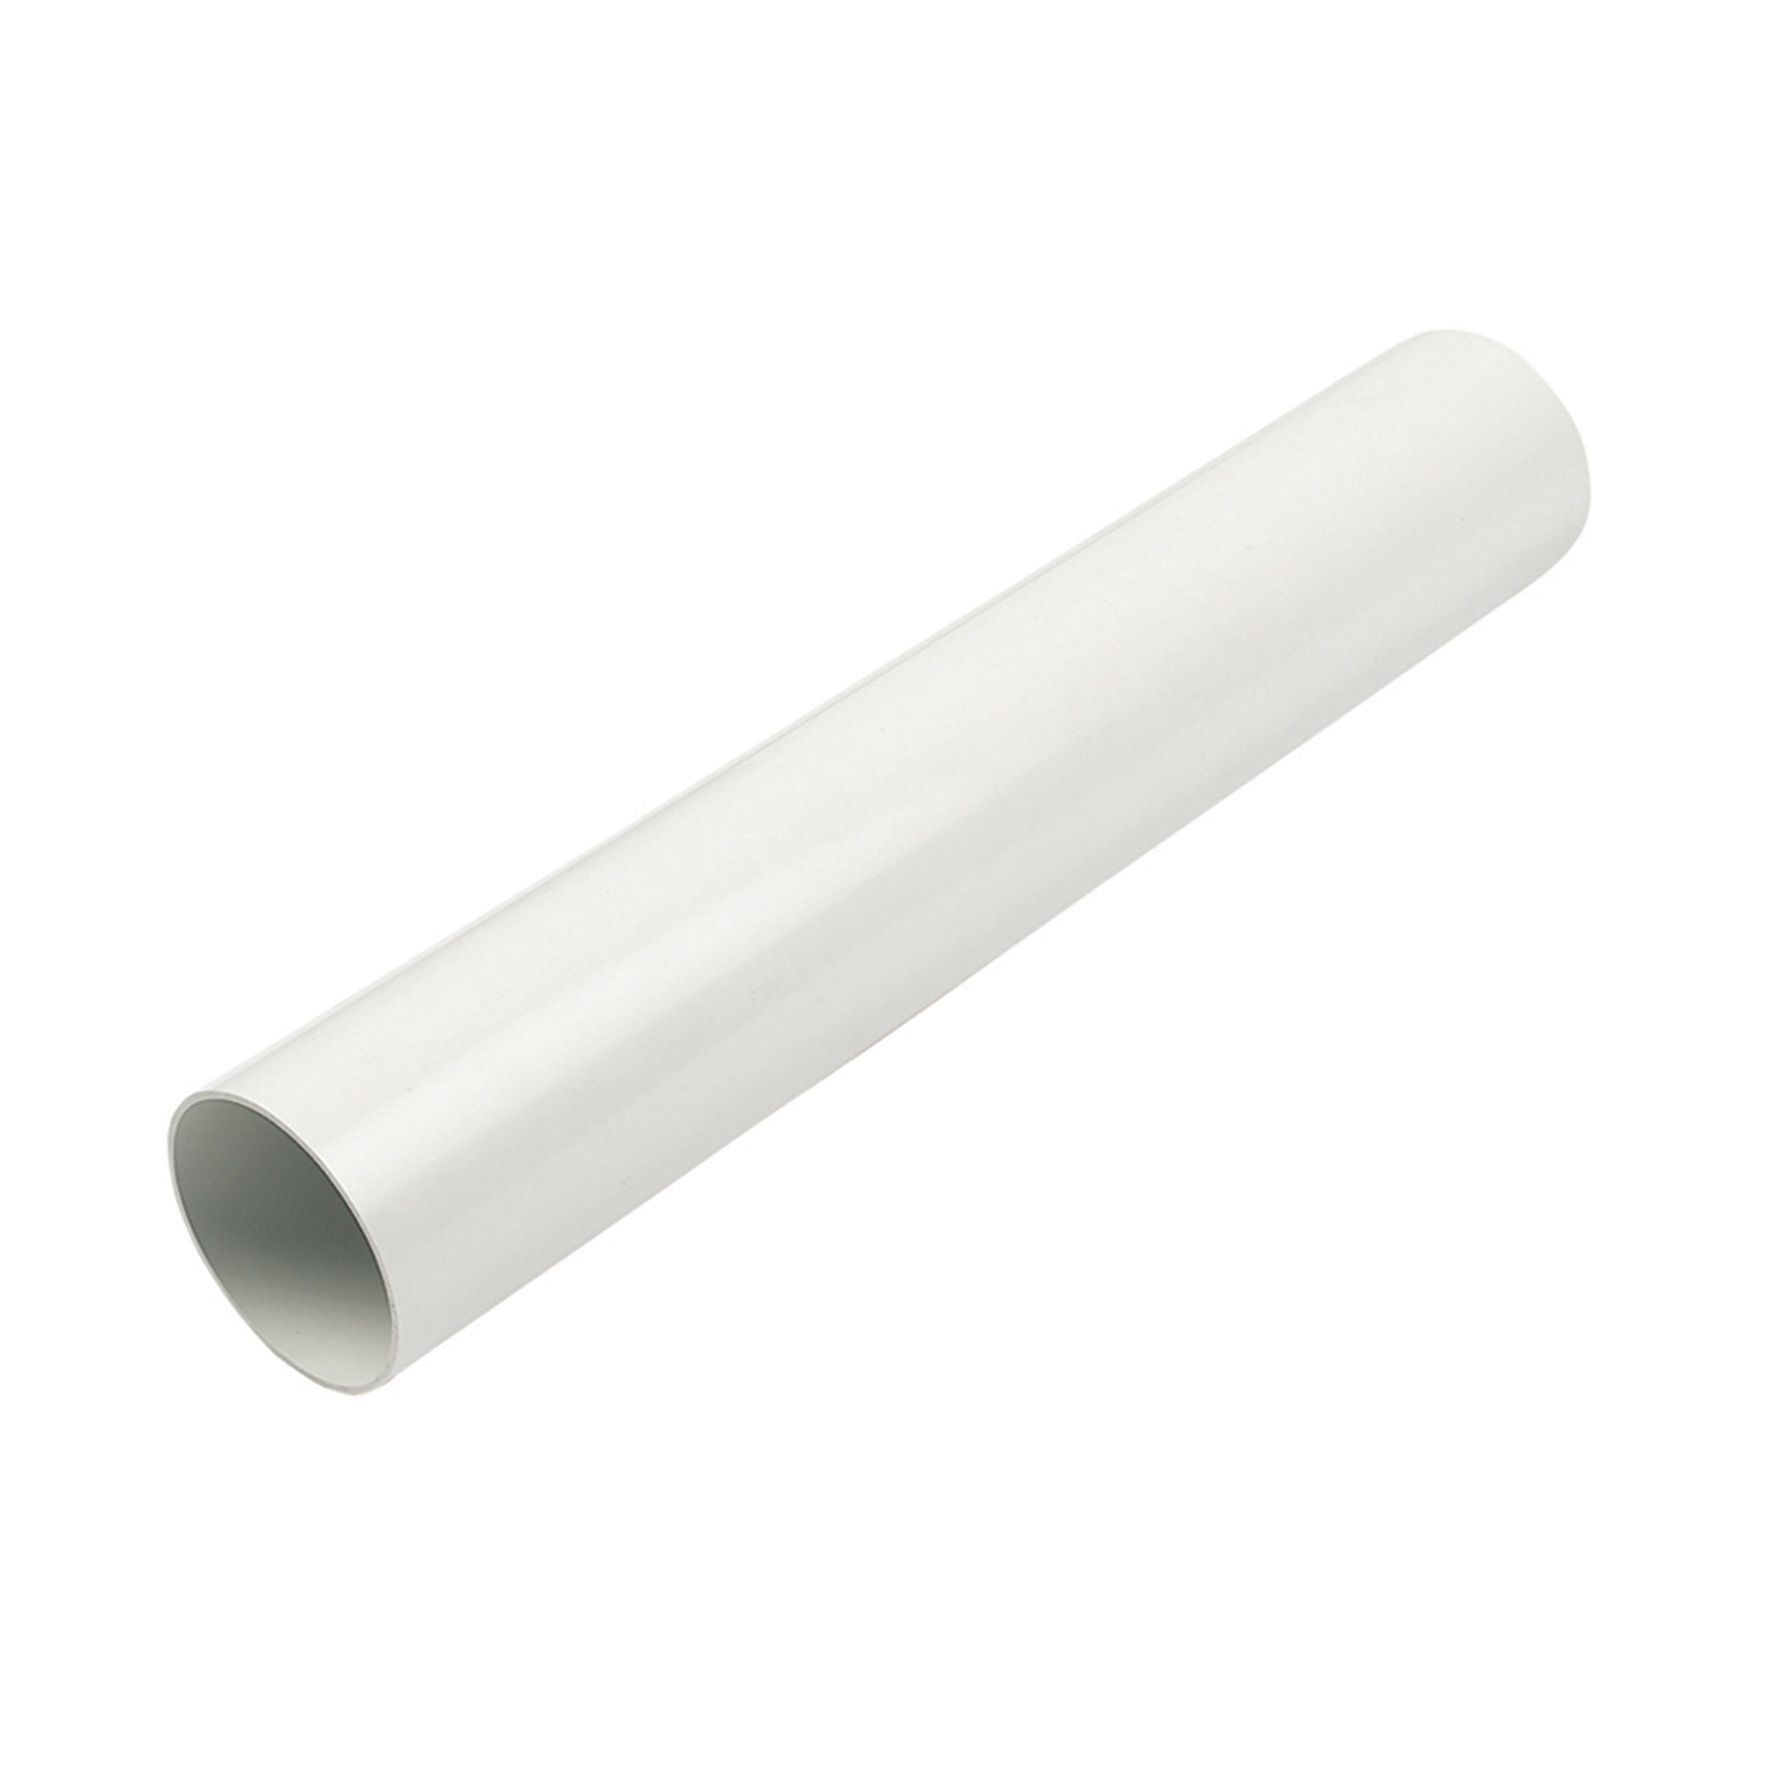 Image of FloPlast WS02W Solvent Weld Waste Pipe - White 40mm x 3m